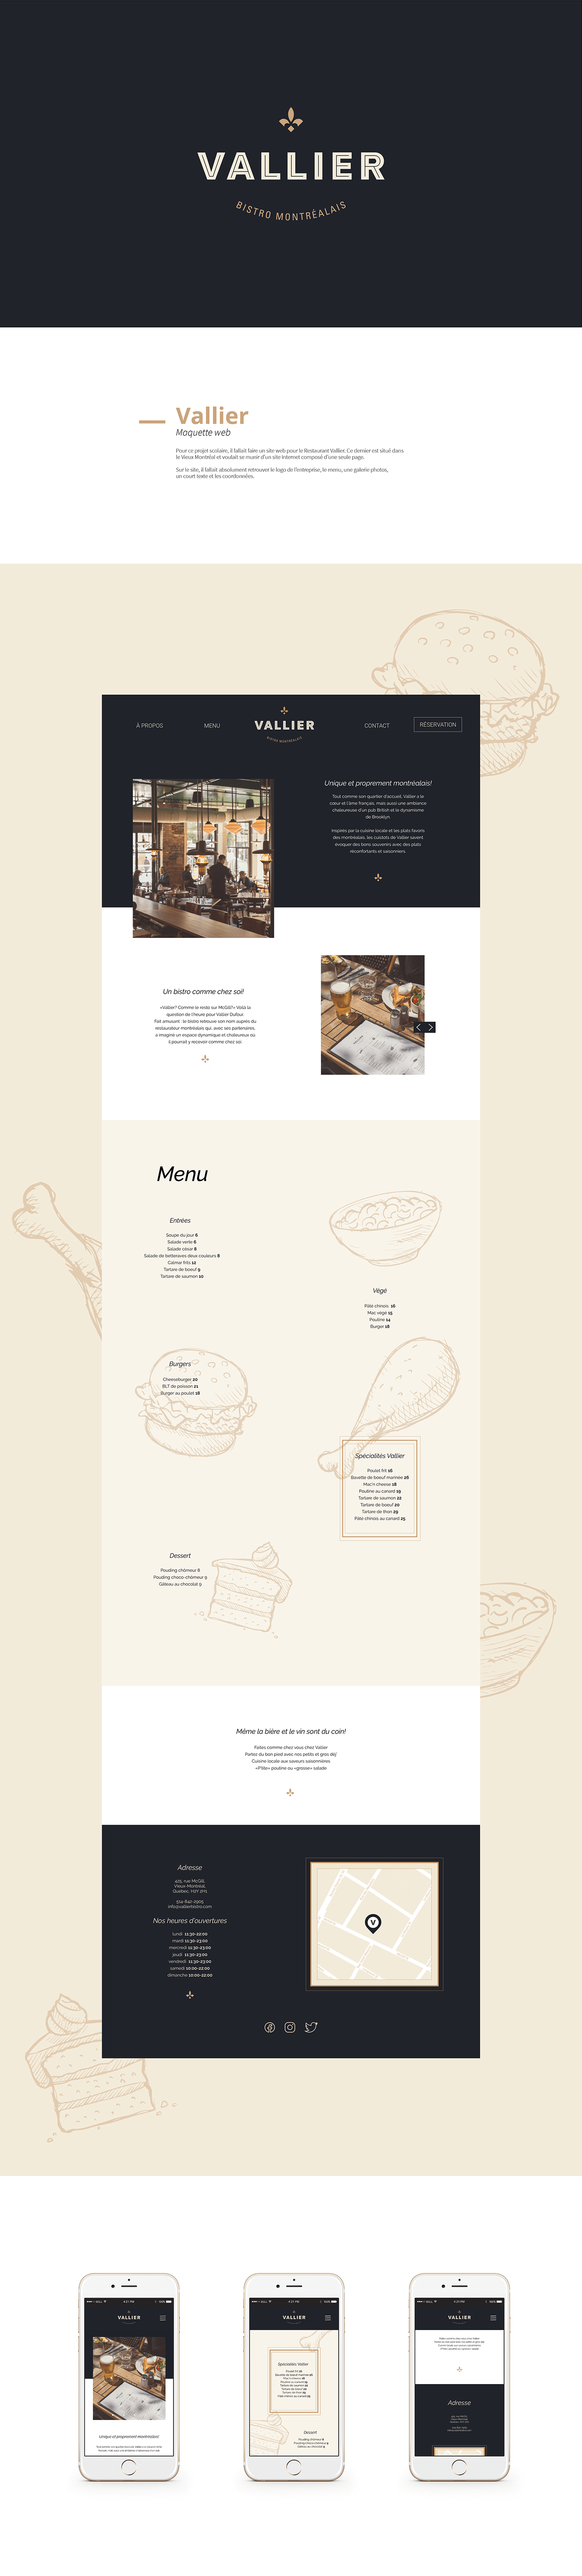 adobexd graphicdesign Interface Onepager restaurant UI uidesign UserInterface Montreal Vallier